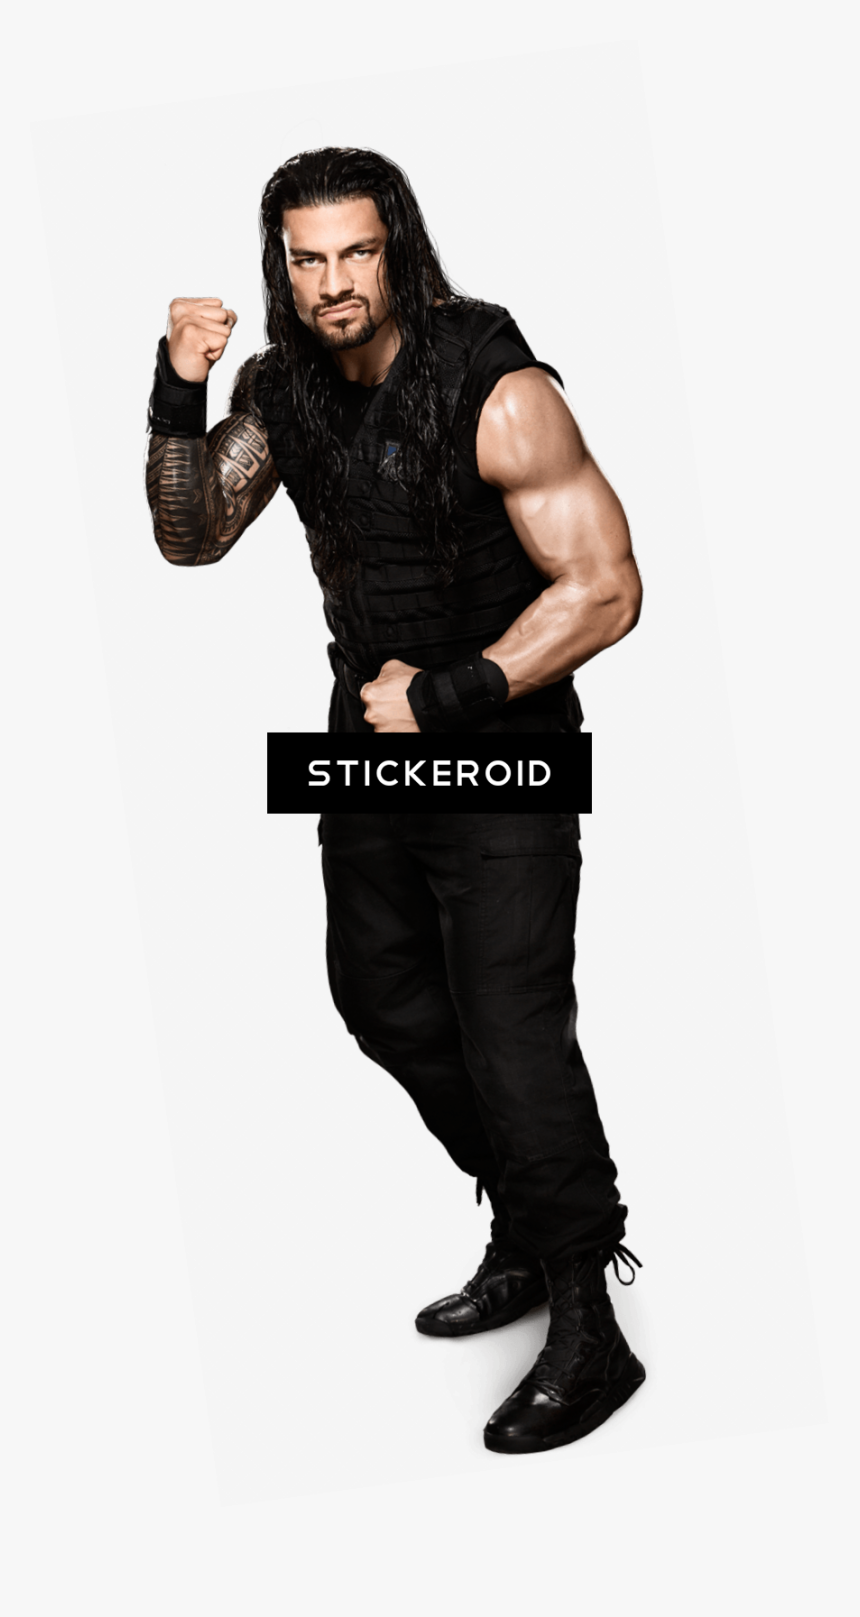 Roman Reigns Fight - Roman Reigns Body In Hd, HD Png Download, Free Download